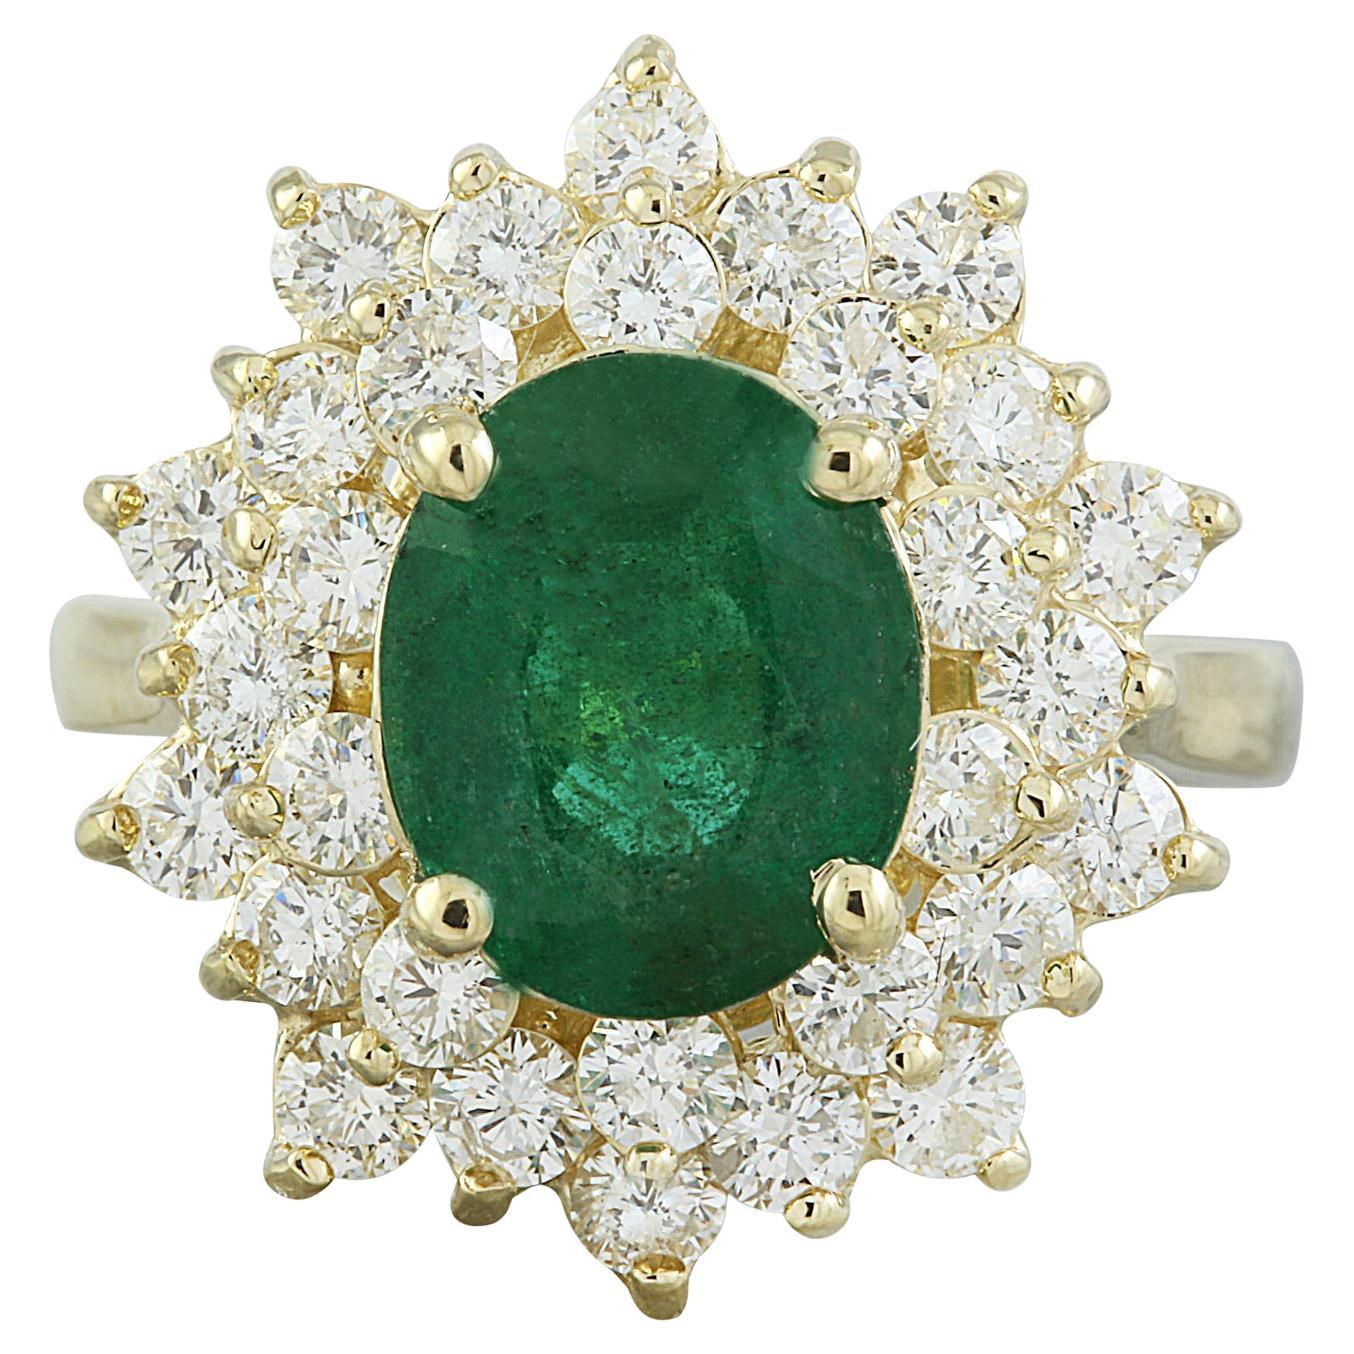 Luxurious Natural Emerald Diamond Ring in 14K Solid Yellow Gold